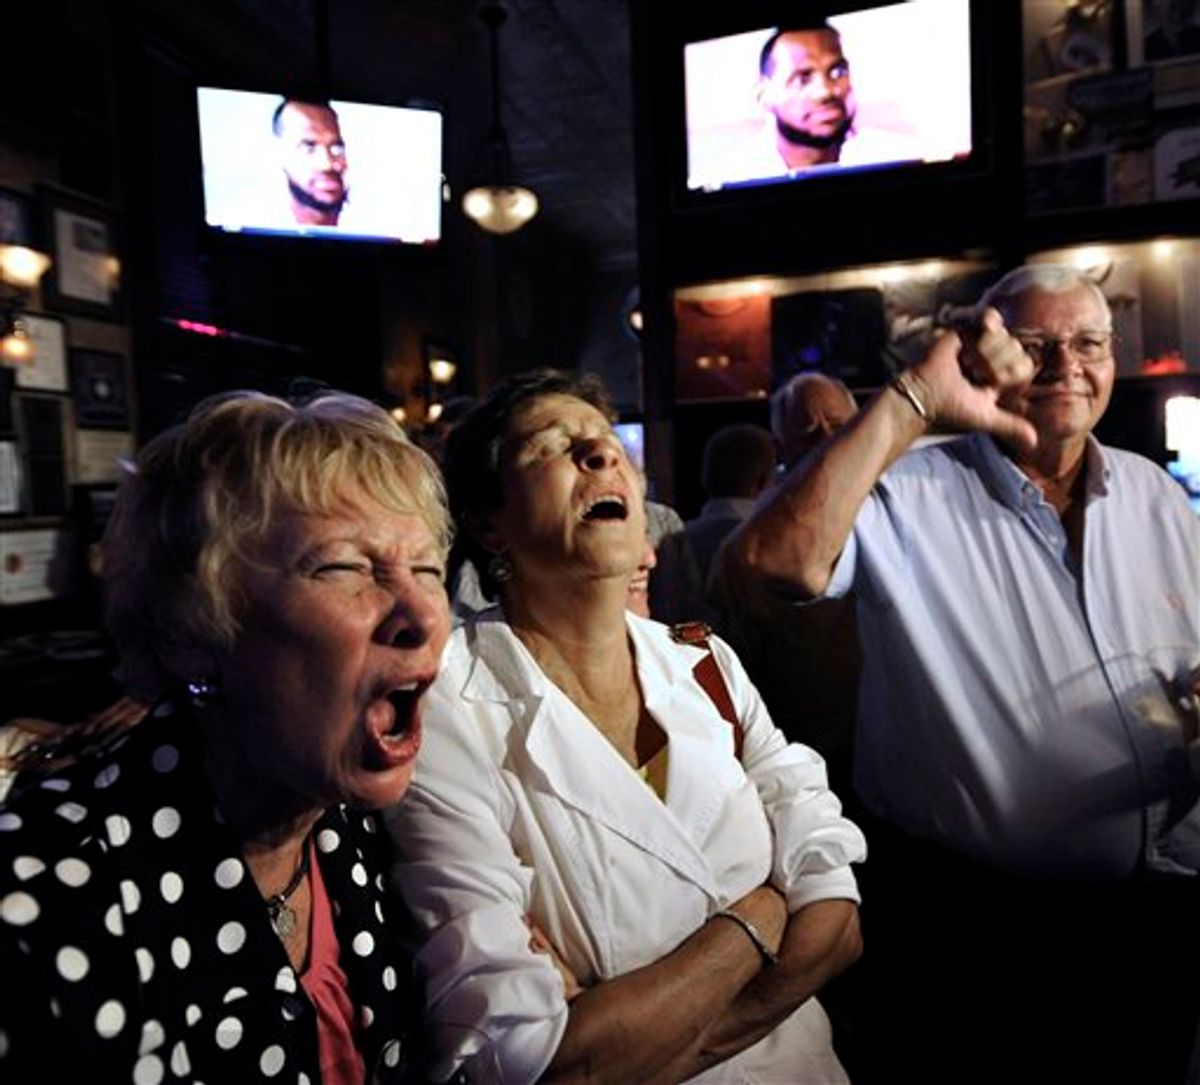 Chicago Bulls fans Marianne Gilligan, left, Ann Deignan, middle, and Ed Gilligan react while watching LeBron James announce on television that he will play for the Miami Heat, at Harry Caray's restaurant in Chicago, Thursday, July 8, 2010. (AP Photo/Paul Beaty)   (AP)